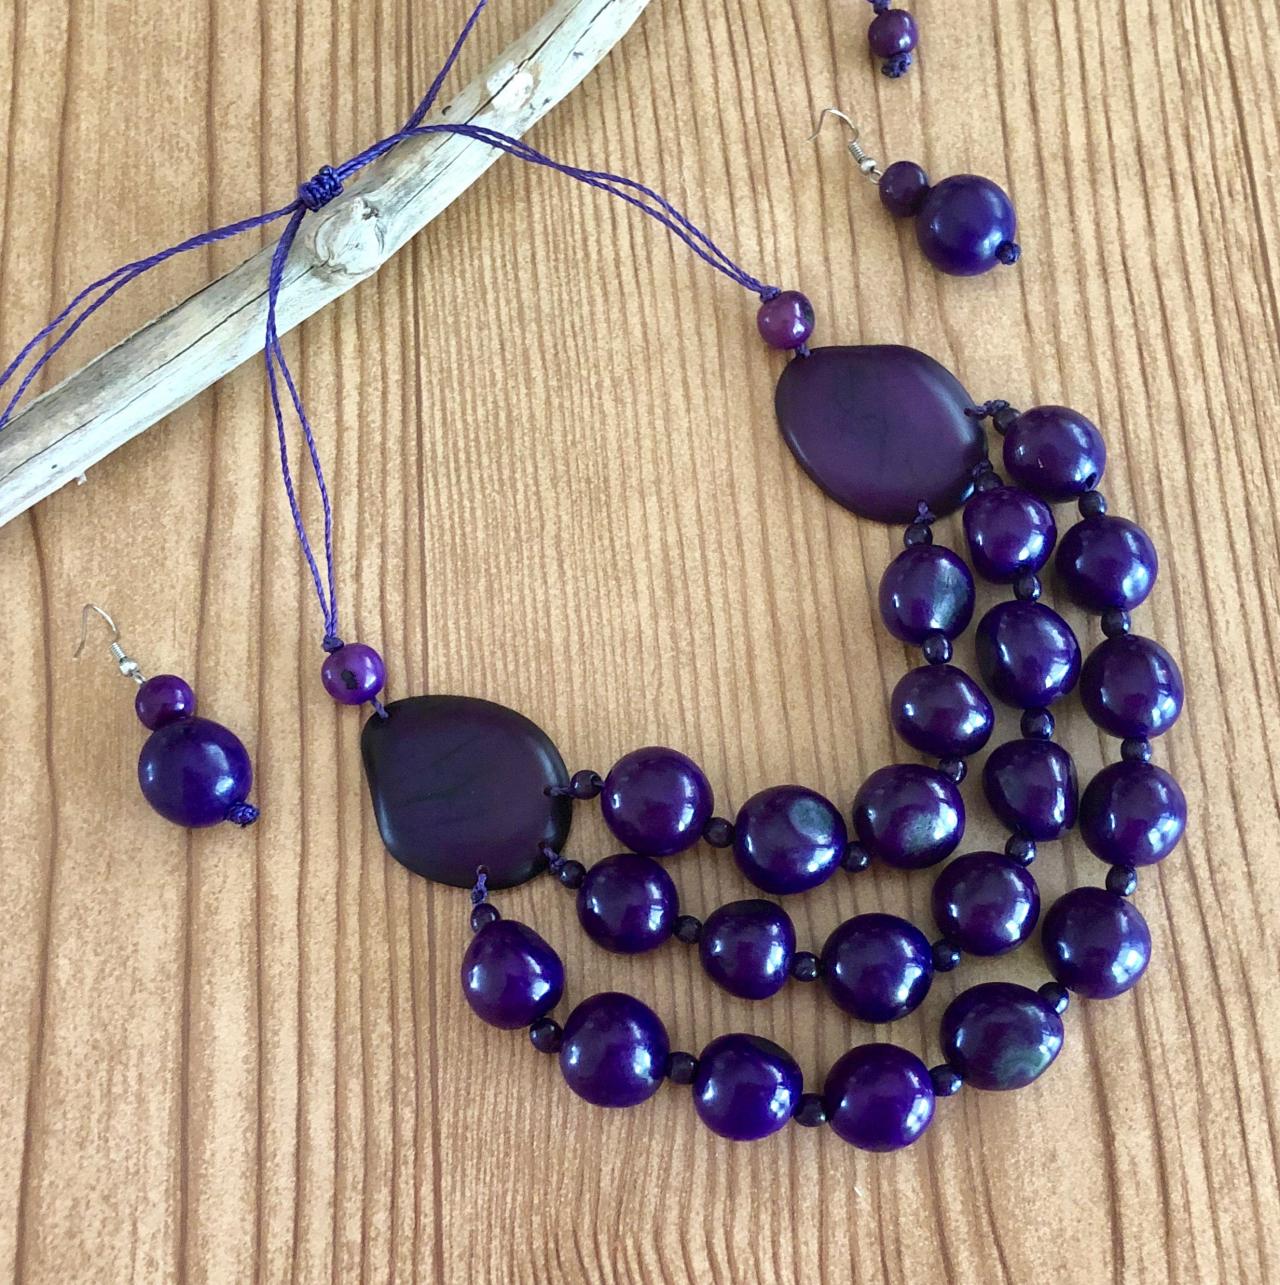 Purple Tagua Necklace And Earrings, Bombona Seeds Necklace, Statement Necklace, Layer Necklace, Three Strand Necklace, Chunky Necklace, Seed